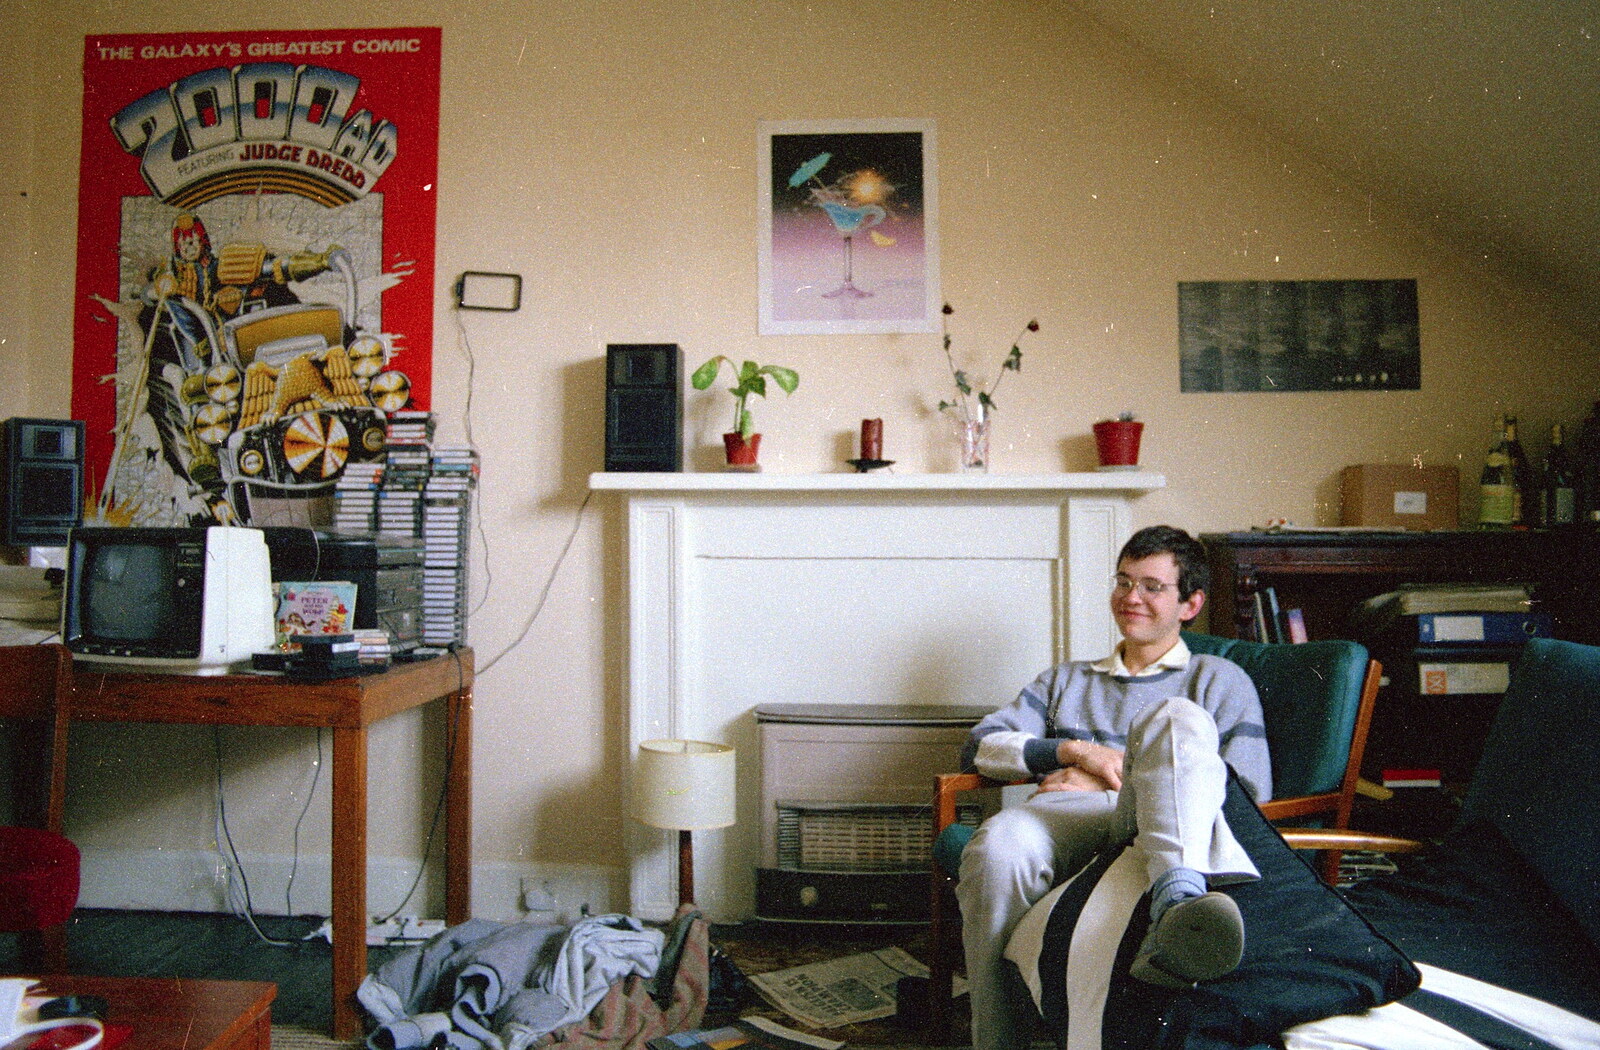 Phil in his room, with Judge Dredd from A Trip to Trinity College, Cambridge - 23rd March 1986